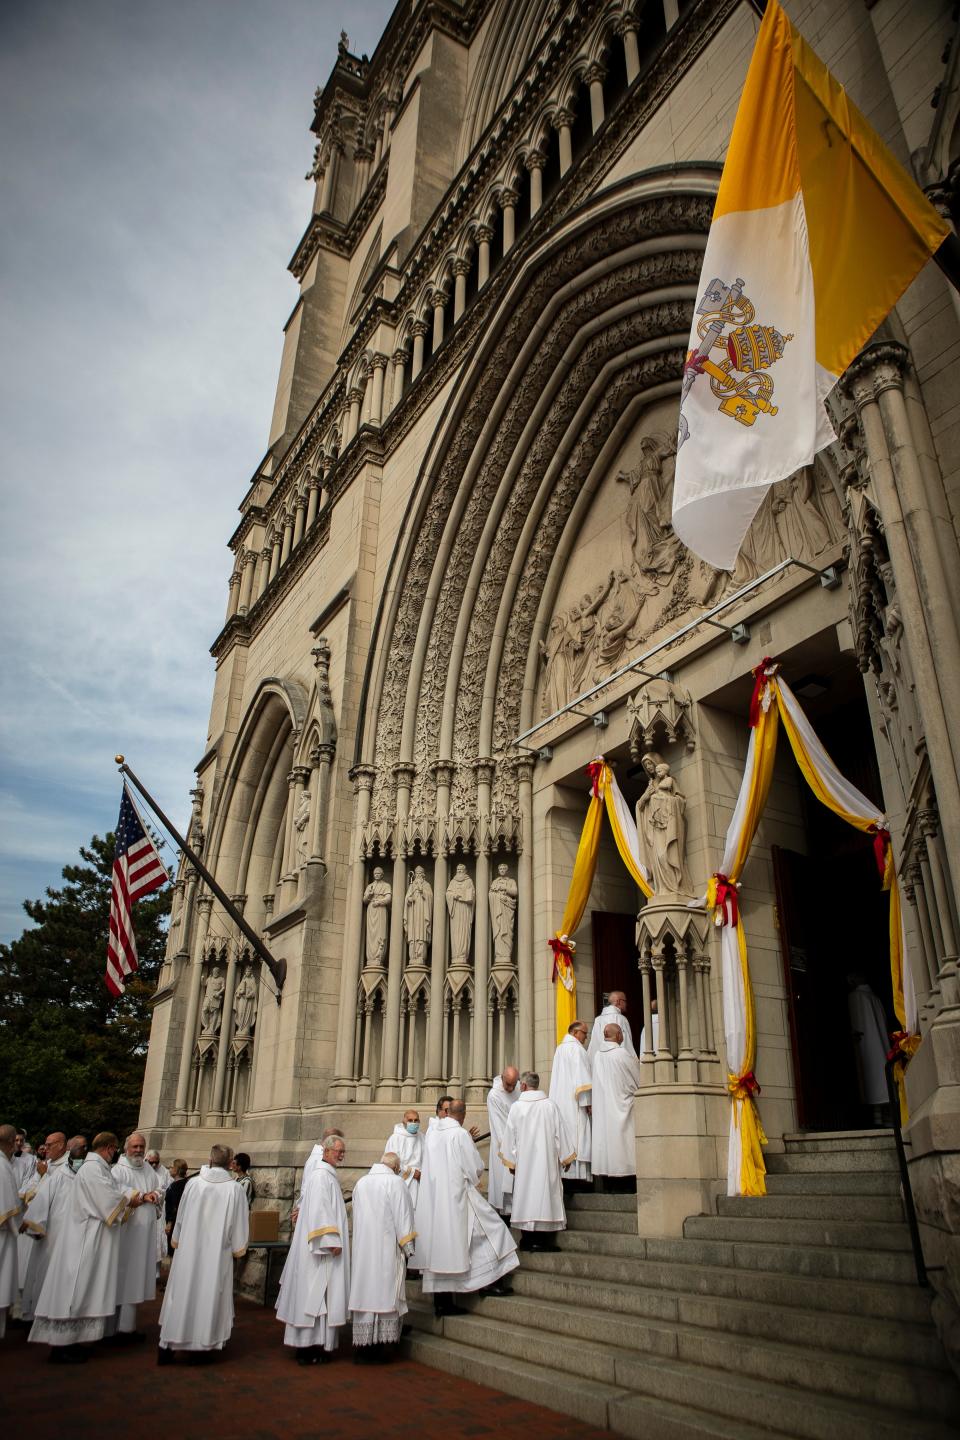 Clergy members make their way into the Cathedral Basilica of the Assumption, in Covington, prior to a ceremony installing and ordaining the new bishop of the Diocese of Covington, John C. Iffert, on Thursday, Sept. 30. Iffert was announced as bishop-elect in July by Pope Francis and will replace Bishop Roger Foys.